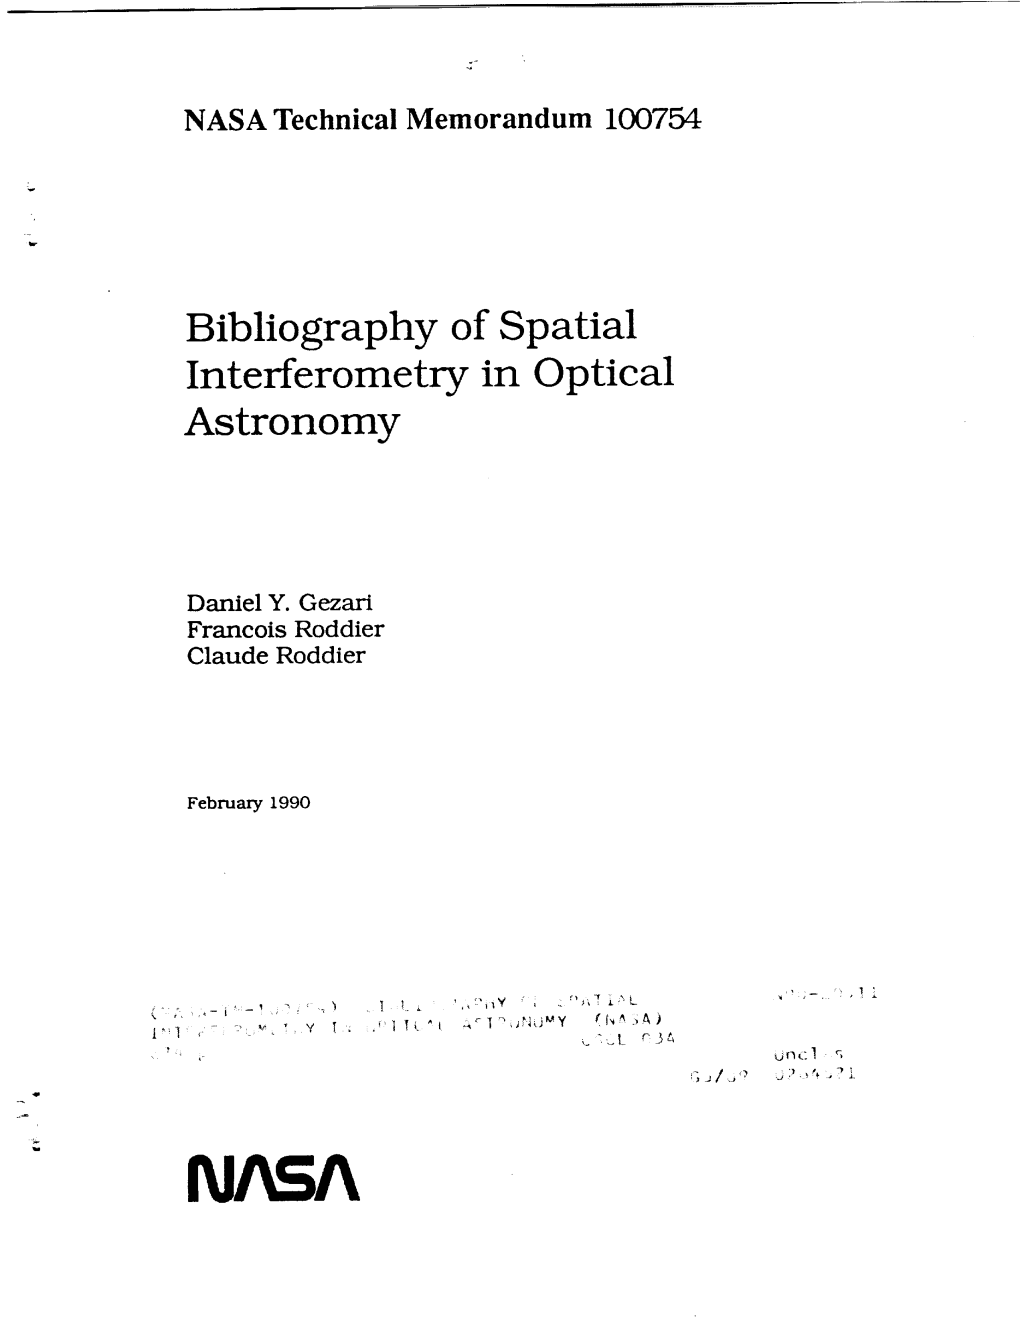 Bibliography of Spatial Interferometry in Optical Astronomy